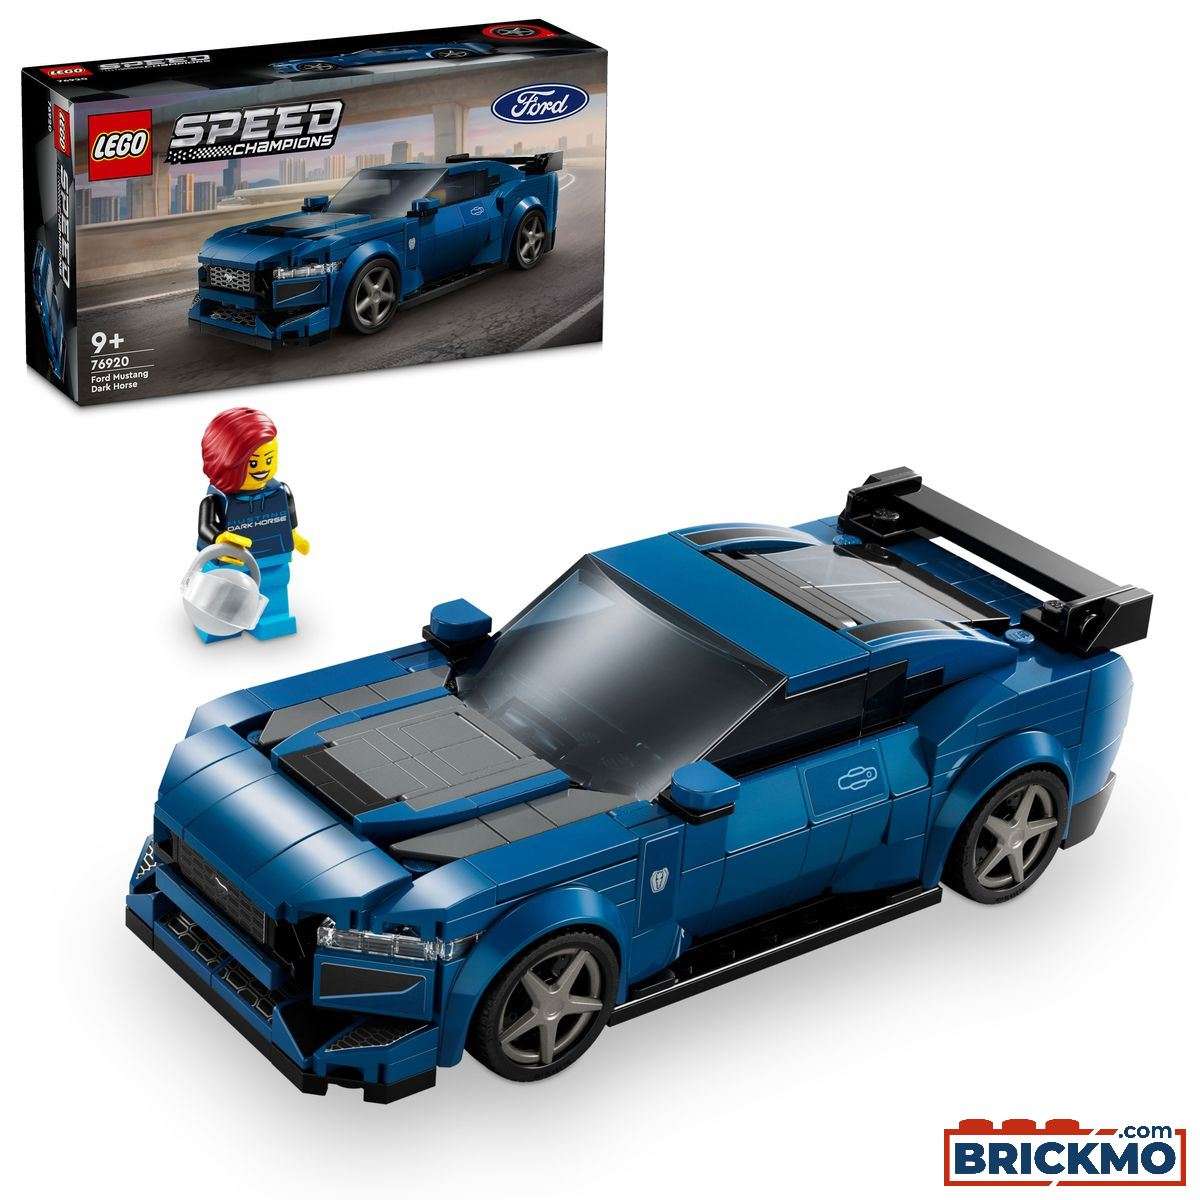 LEGO Speed Champions 76920 Sportovní auto Ford Mustang Dark Horse 76920